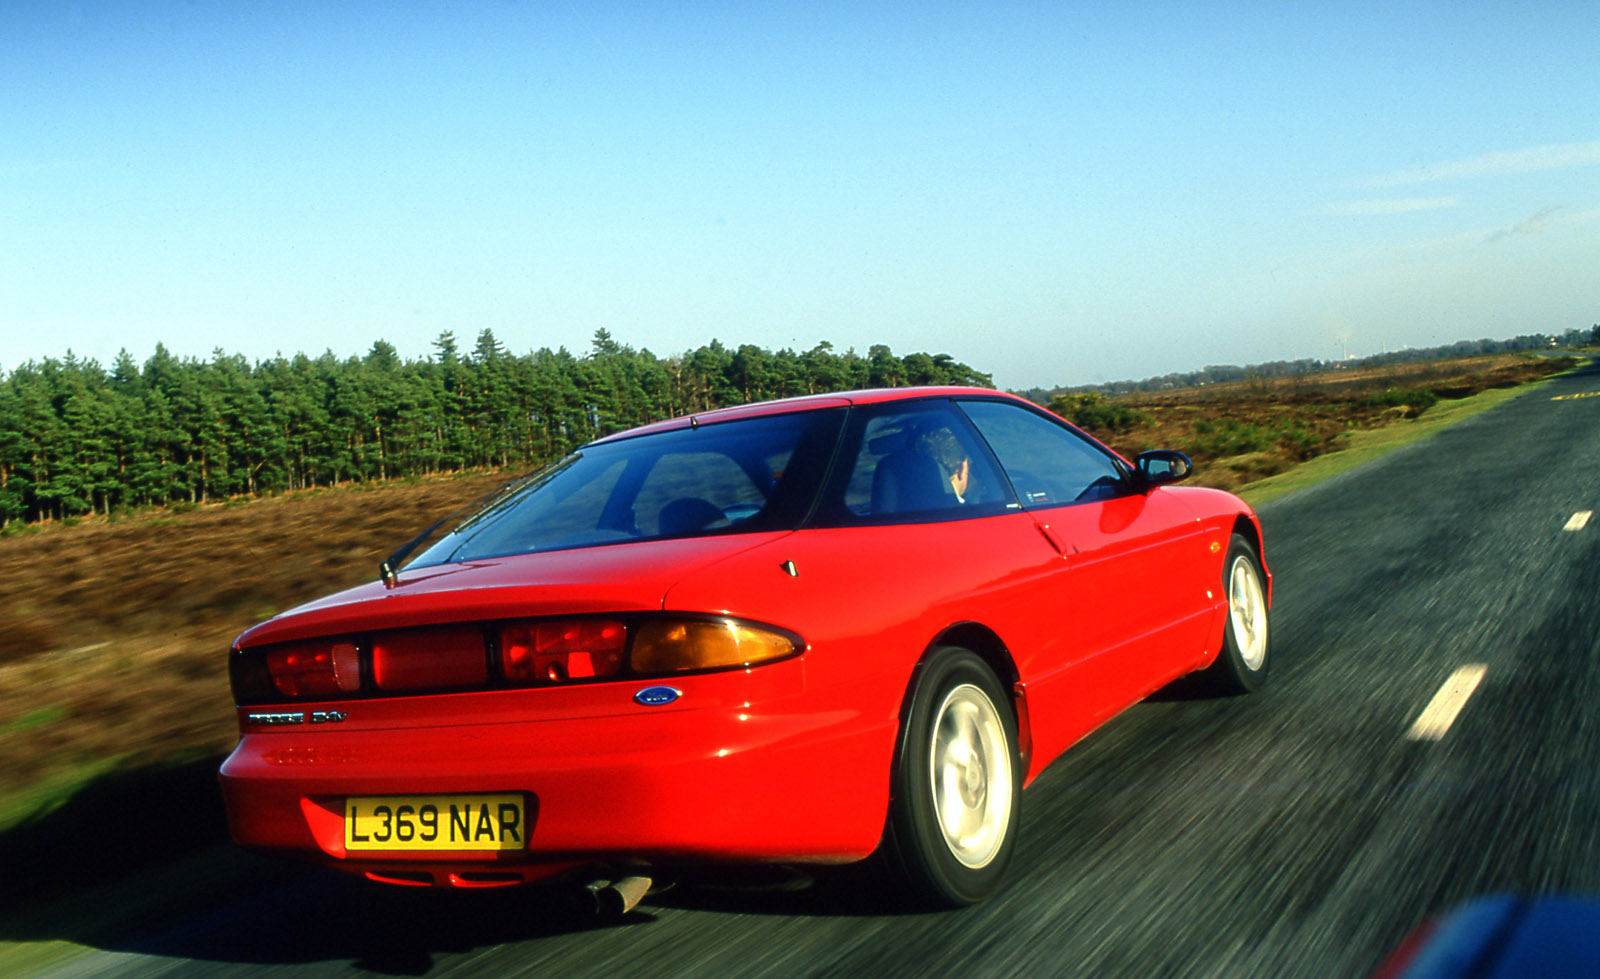 Used car buying guide: Ford Probe | Autocar